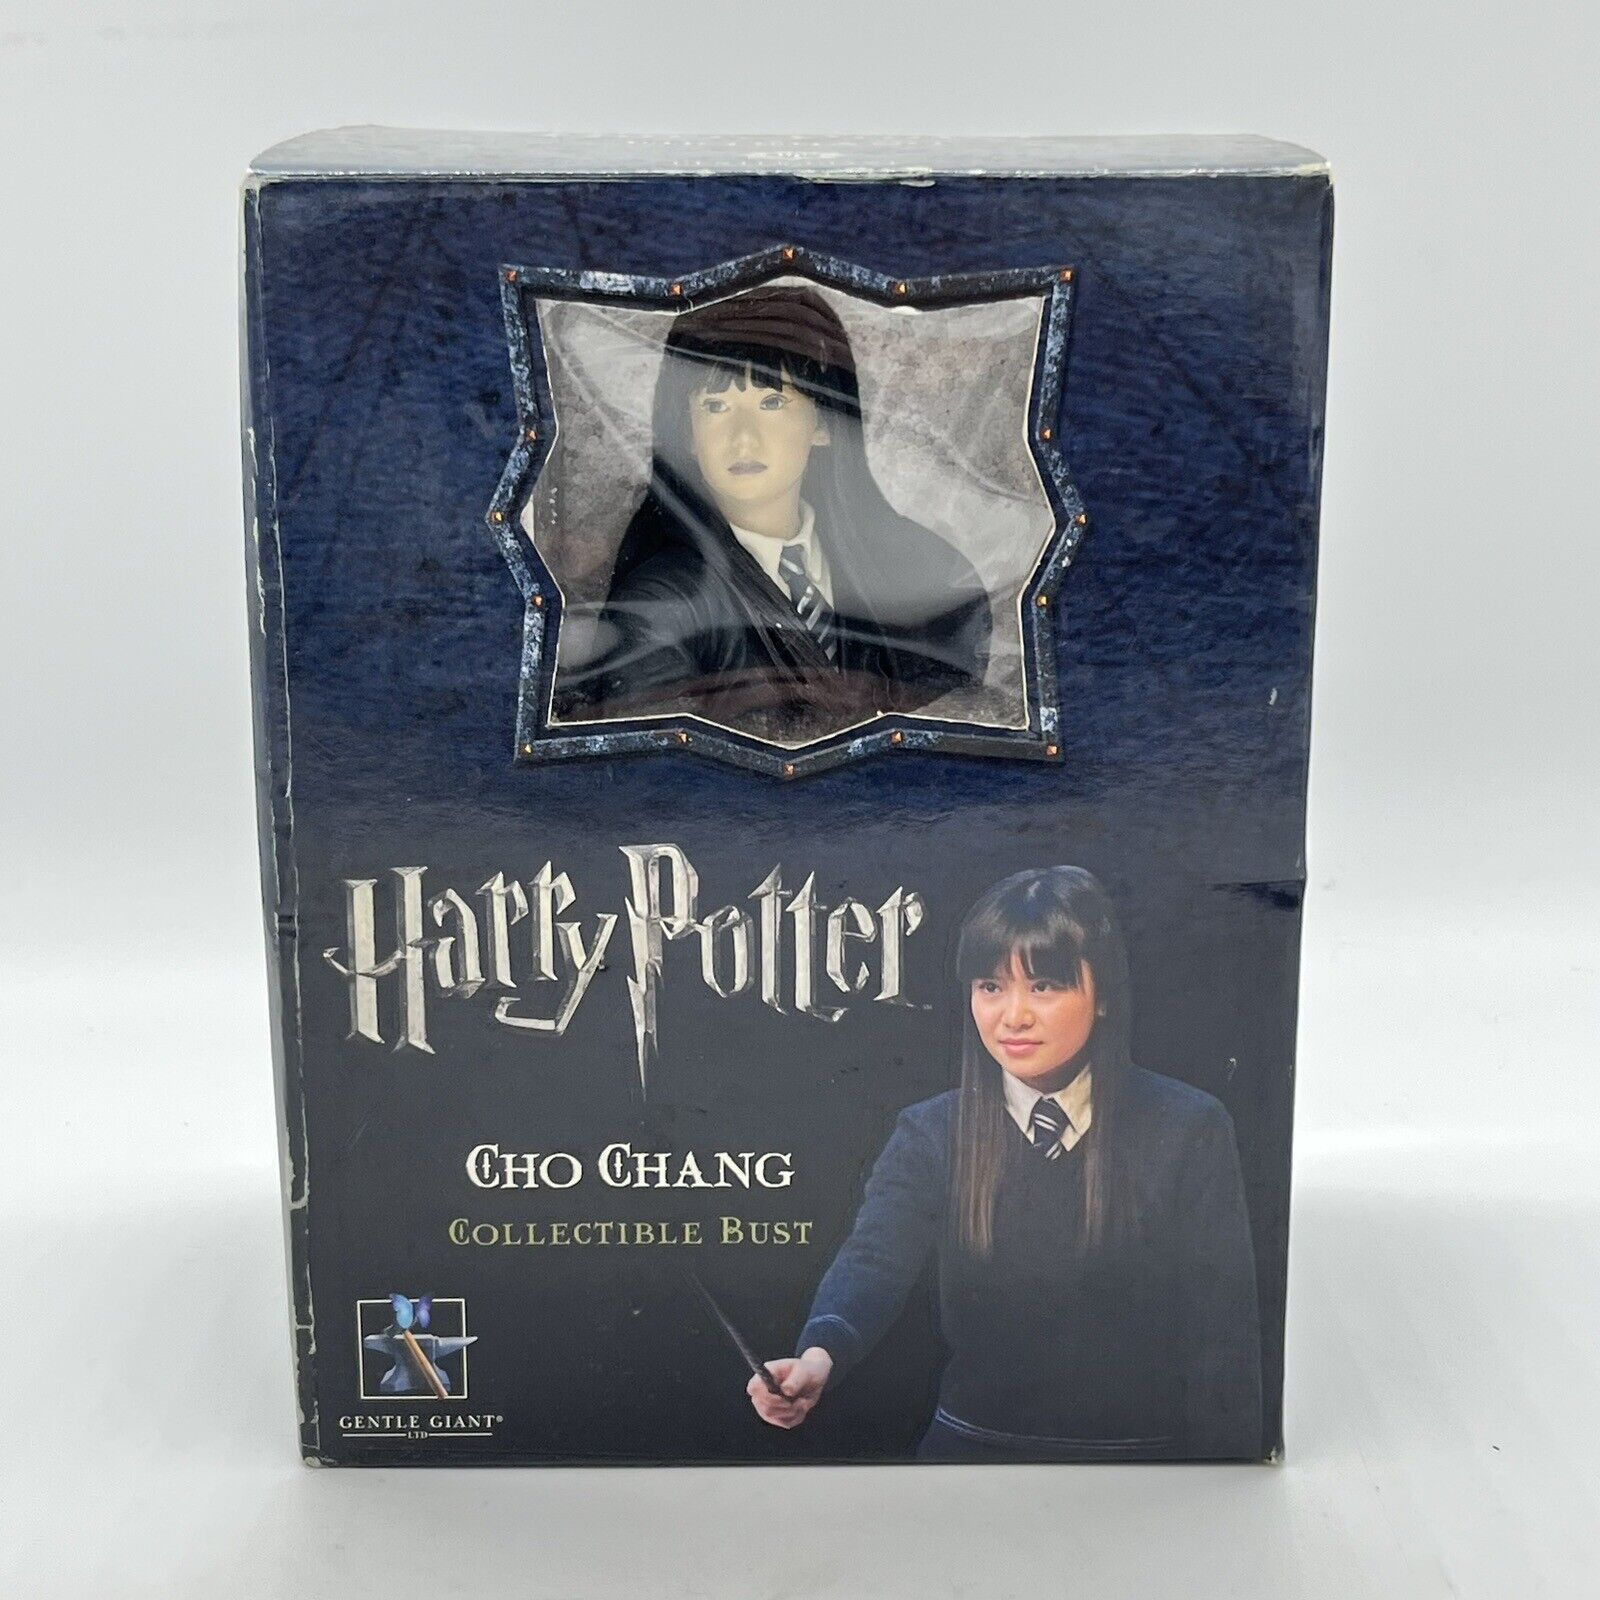 Harry Potter Cho Chang 2007 Gentle Giant Collectible Bust Limited Ed 894/2500